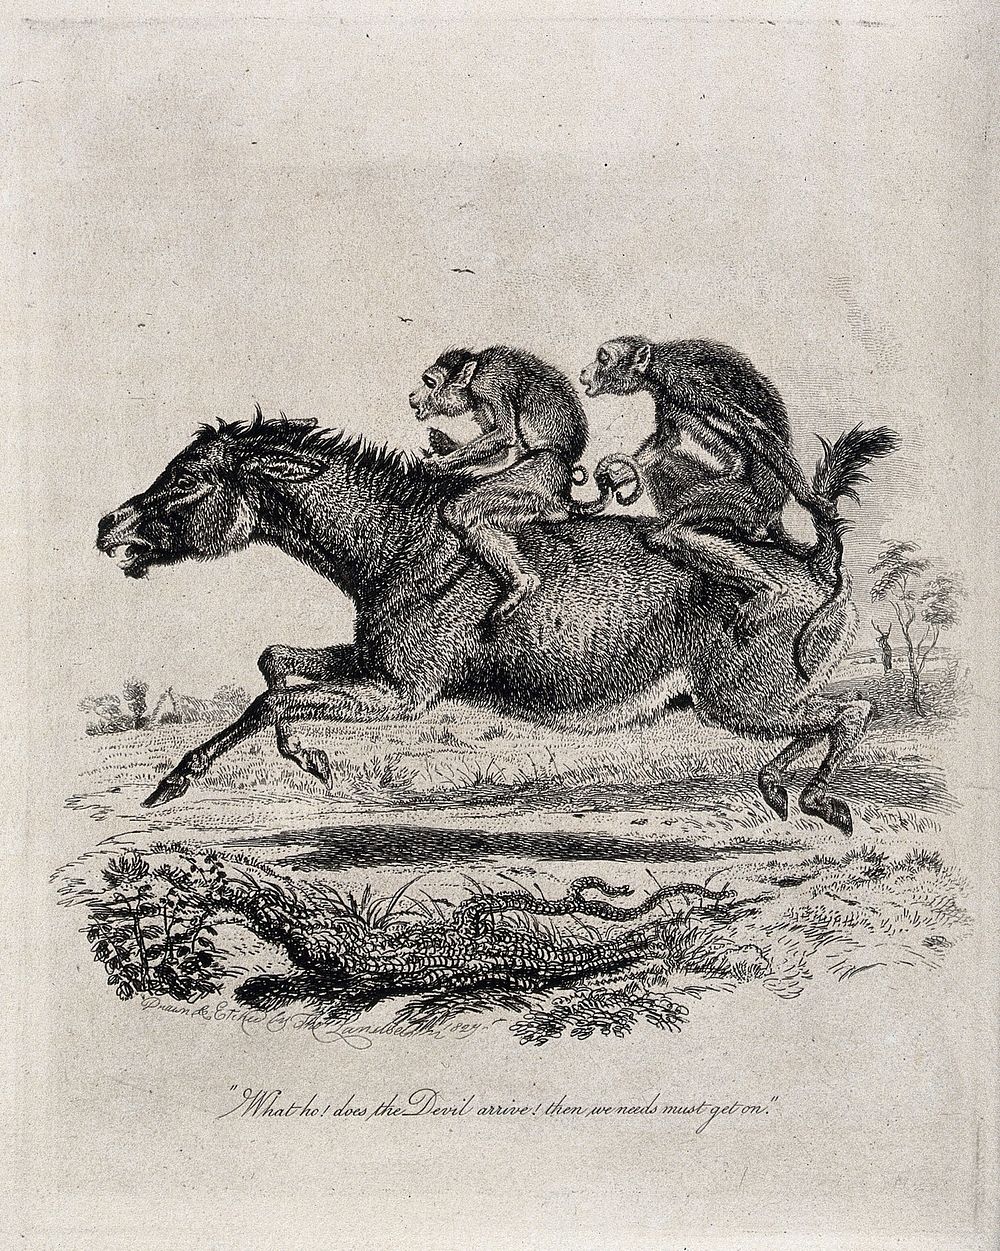 Two monkey jockeys are riding a terrified donkey. Etching by T. Landseer after himself.